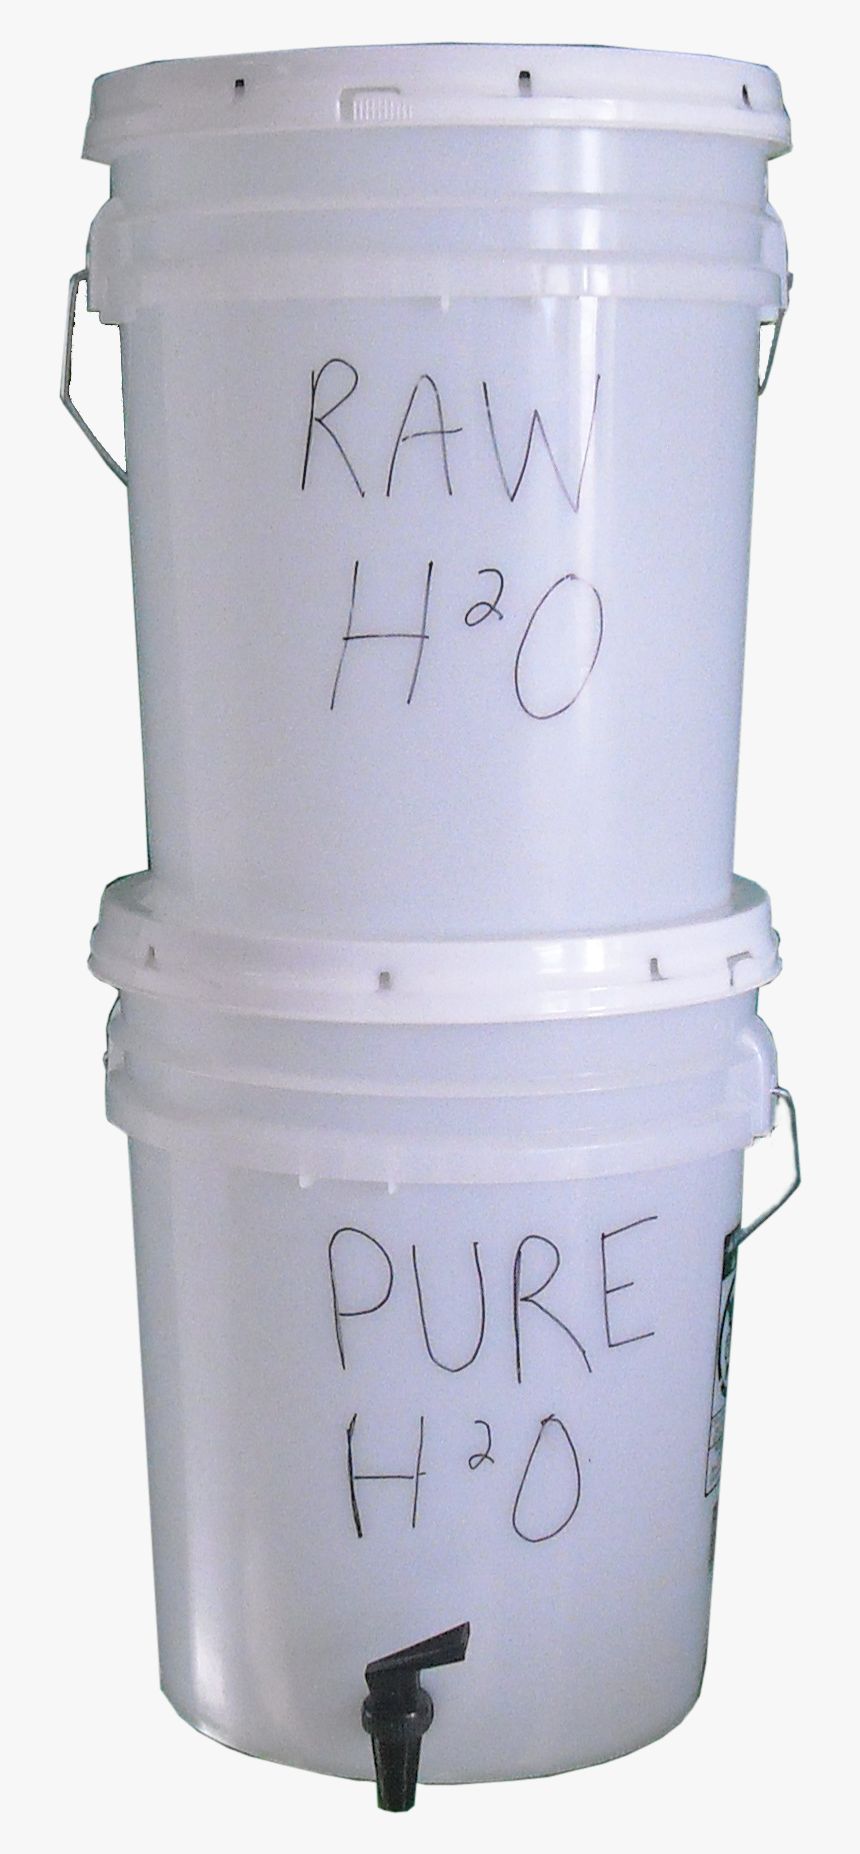 Homemade Bucket Water Filter And Purifier - Water Purifier Homemade Model, HD Png Download, Free Download